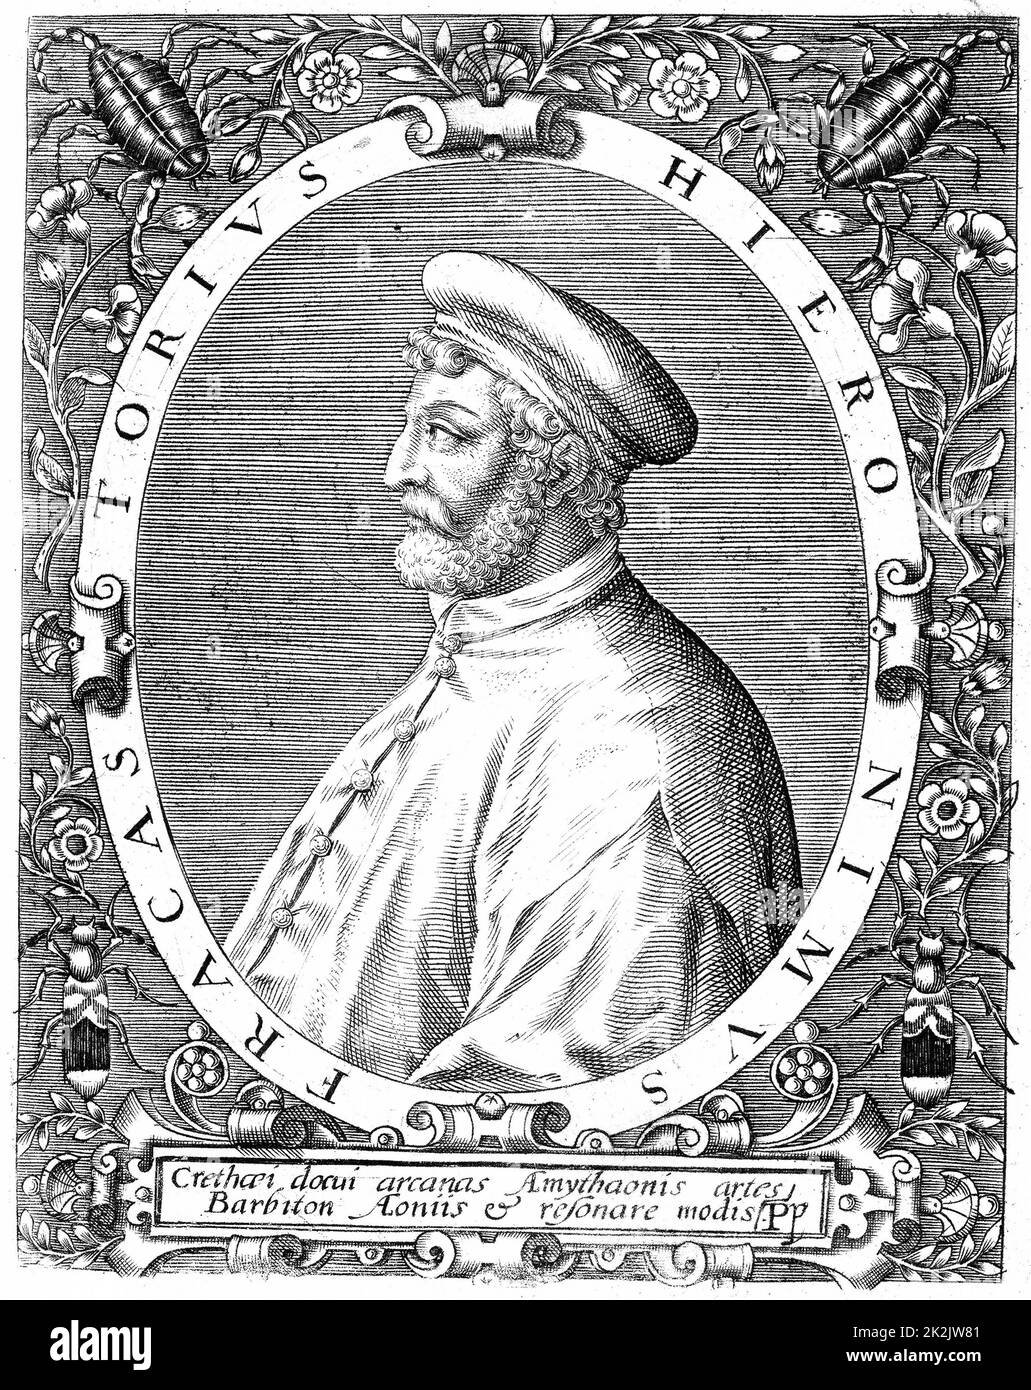 Girolamo Frascatoro (Hieronymus Fracastorius) c1478-1553. Italian physician, poet and astronomer. Germ theory of disease. Best remembered for work in rhyme describing Syphilis 'Syphilis sive morbus Gallicus' (Syphilis or the French Disease) 1530. Engravin Stock Photo